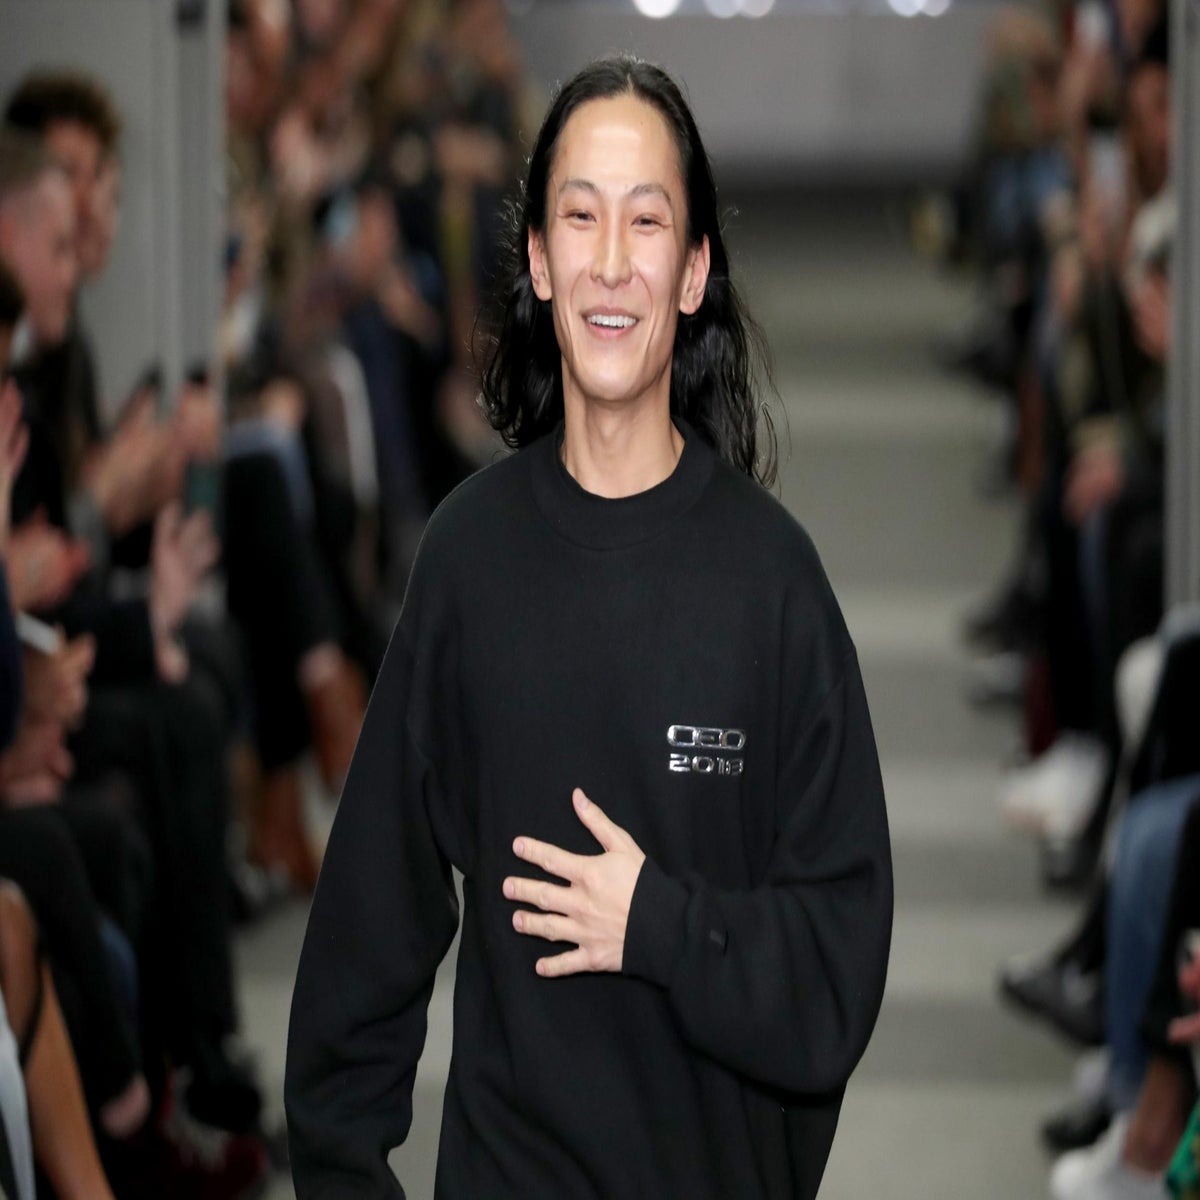 Alexander Wang announces collaboration with Uniqlo on new underwear line, The Independent